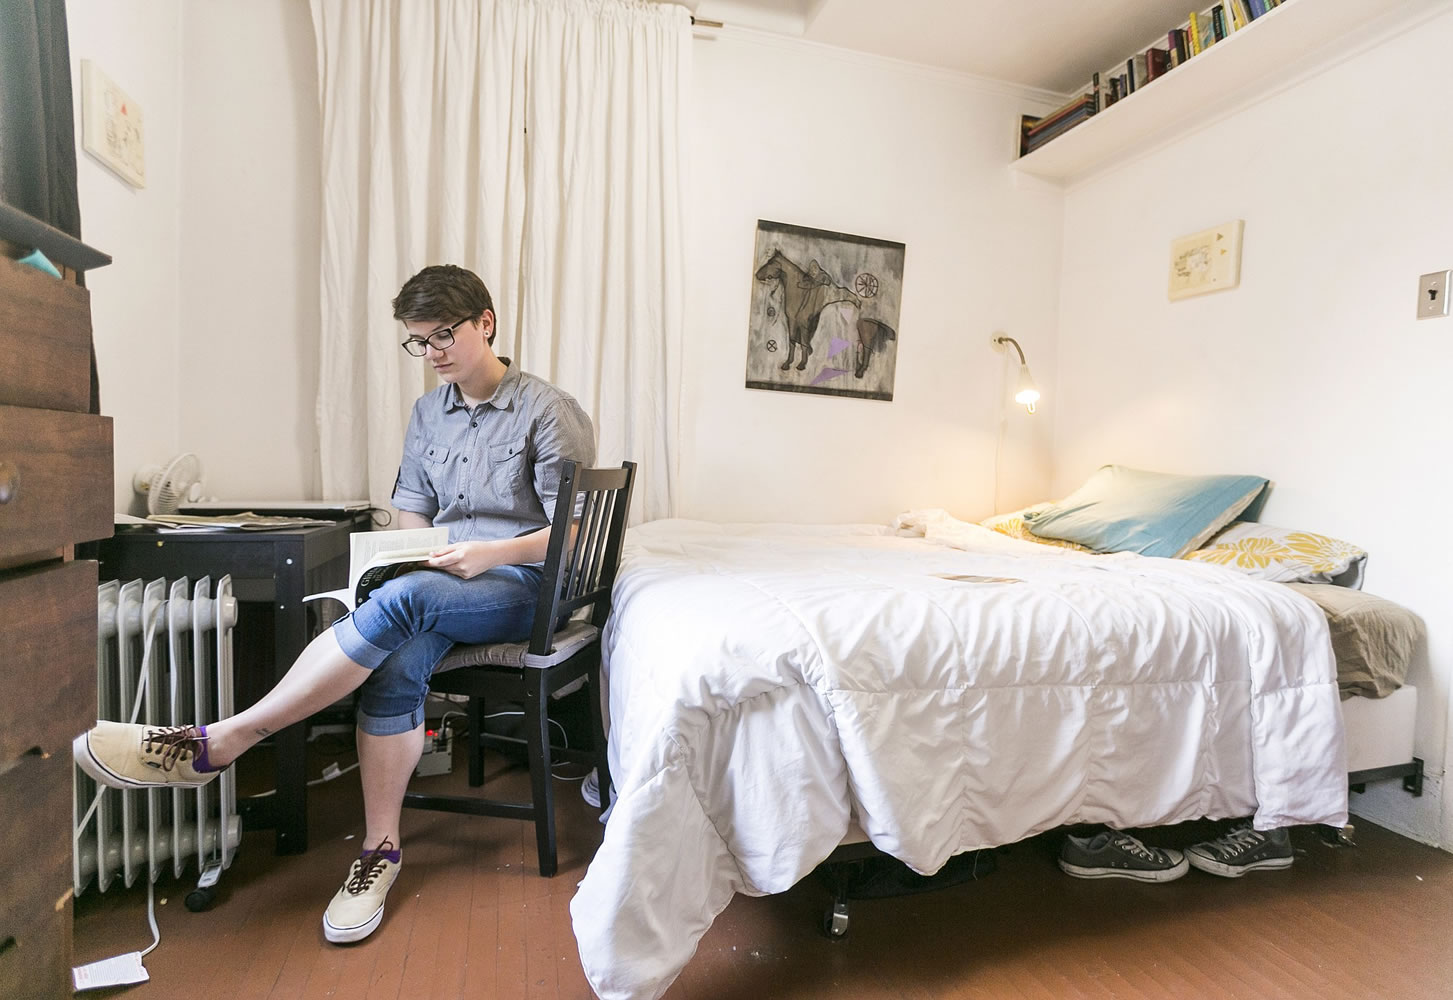 Airbnb guest Megan Walsh, a Chicago writer on a summer internship, reads in her room May 19 at home of artist Jonathan Entler in Los Angeles.